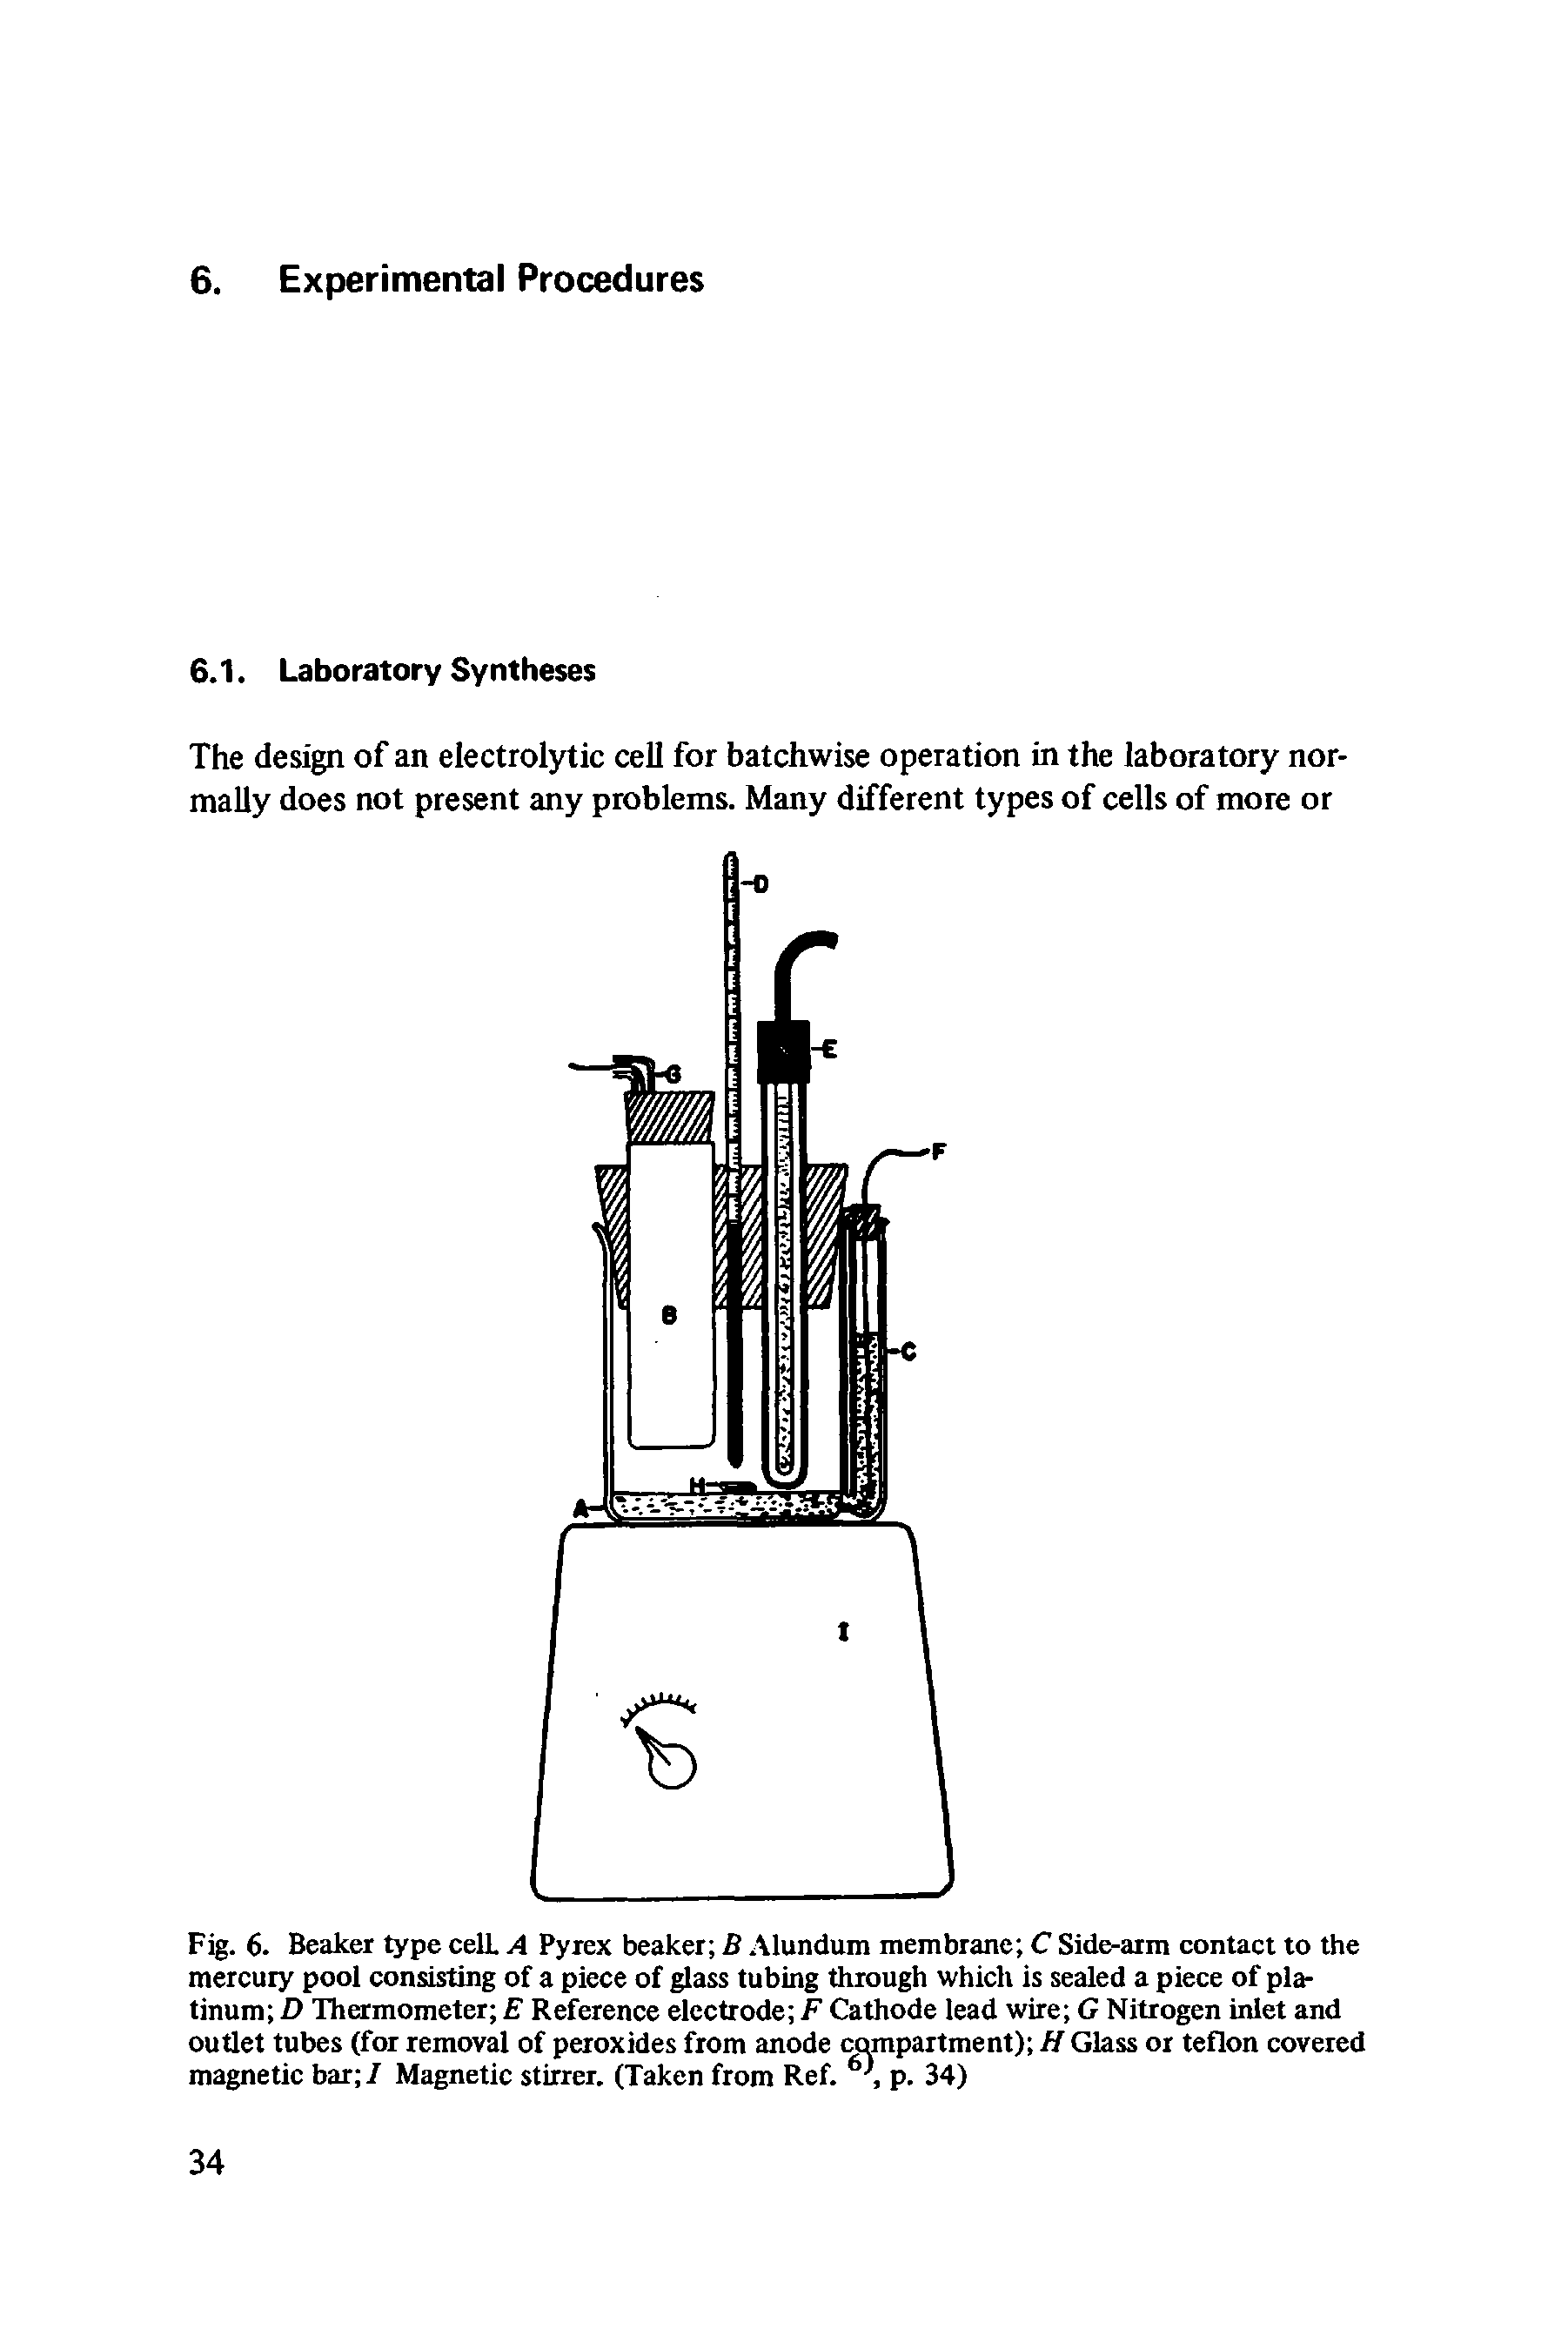 Fig. 6. Beaker type celL A Pyrex beaker B Alundum membrane C Side-arm contact to the mercury pool consisting of a piece of glass tubing through which is sealed a piece of platinum D Thermometer E Reference electrode F Cathode lead wire G Nitrogen inlet and outlet tubes (for removal of peroxides from anode compartment) H Glass or teflon covered magnetic bar / Magnetic stirrer. (Taken from Ref., p. 34)...